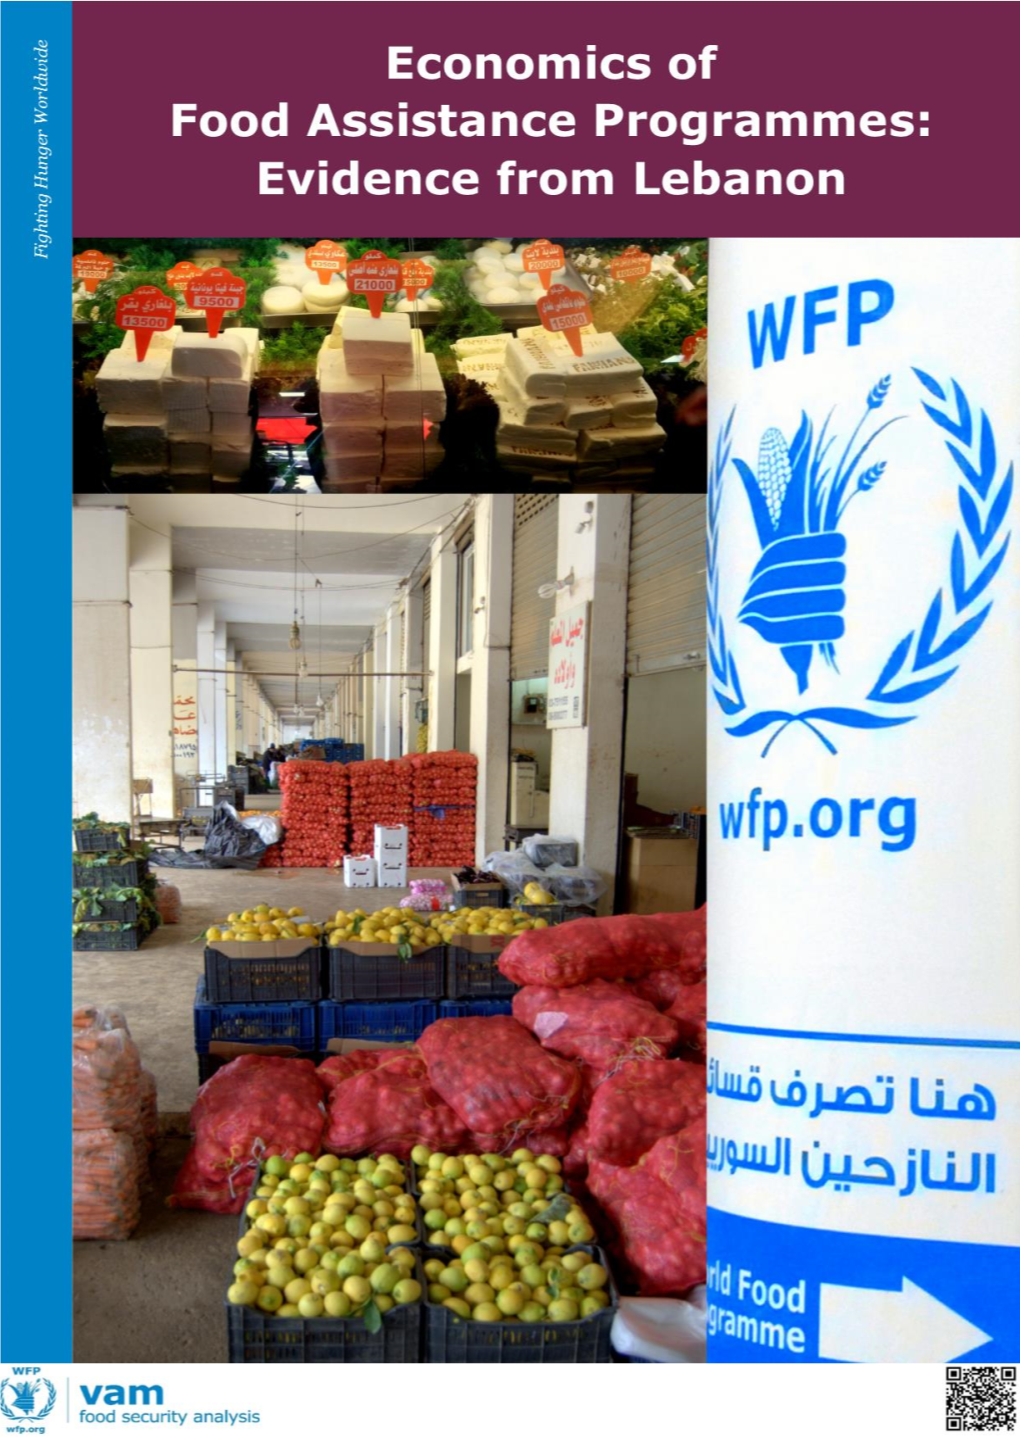 The Economics of Food Assistance Programmes: Evidence from Lebanon